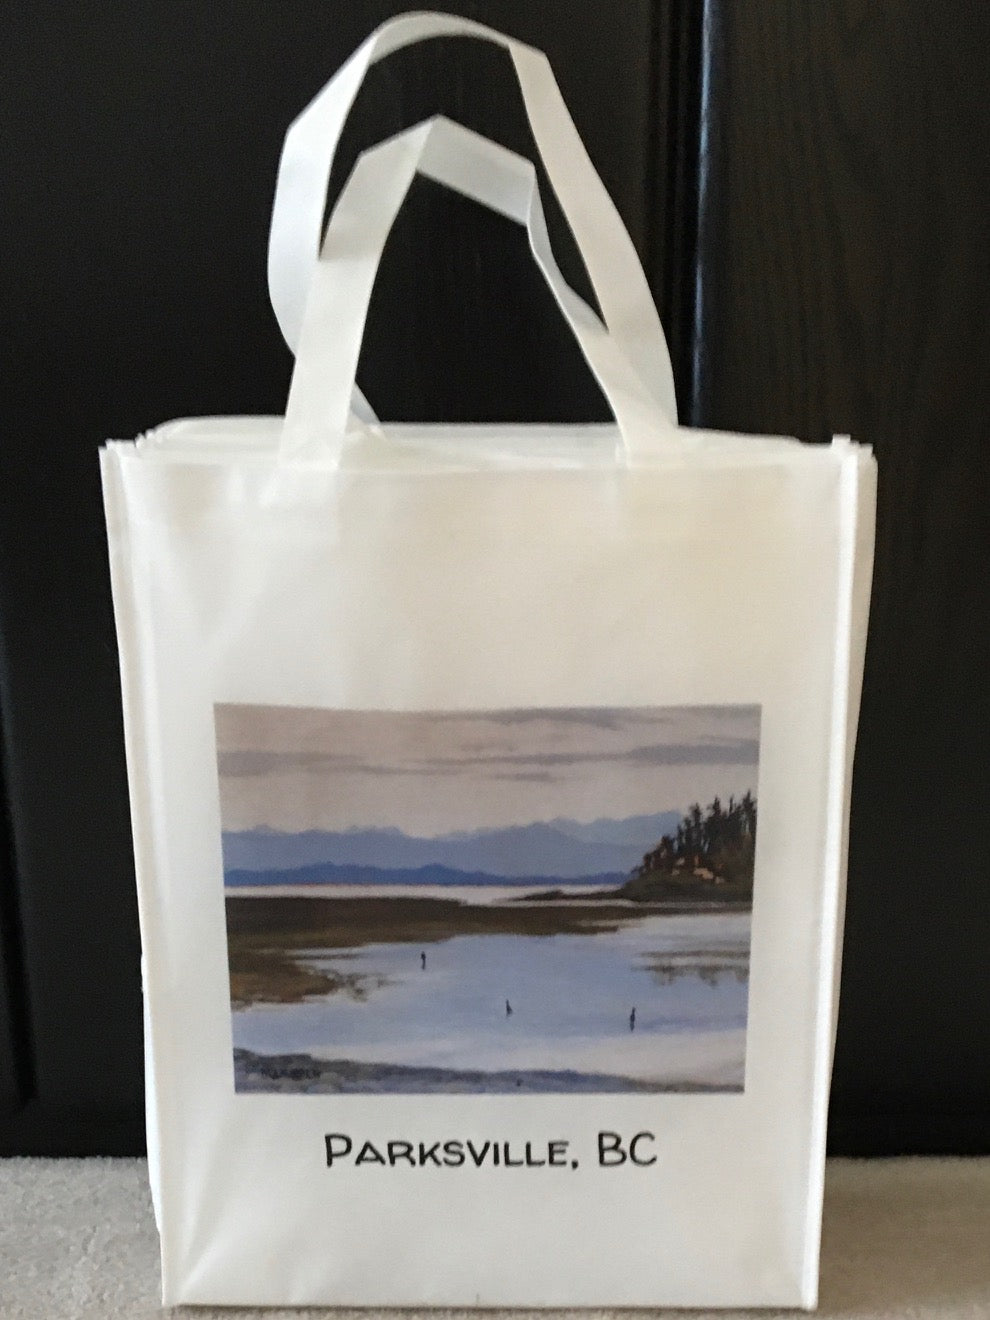 Merrilyn Laursen -Tote Bag with image of Parksville Beach by Merrilyn Laursen - McMillan Arts Centre - Vancouver Island Art Gallery